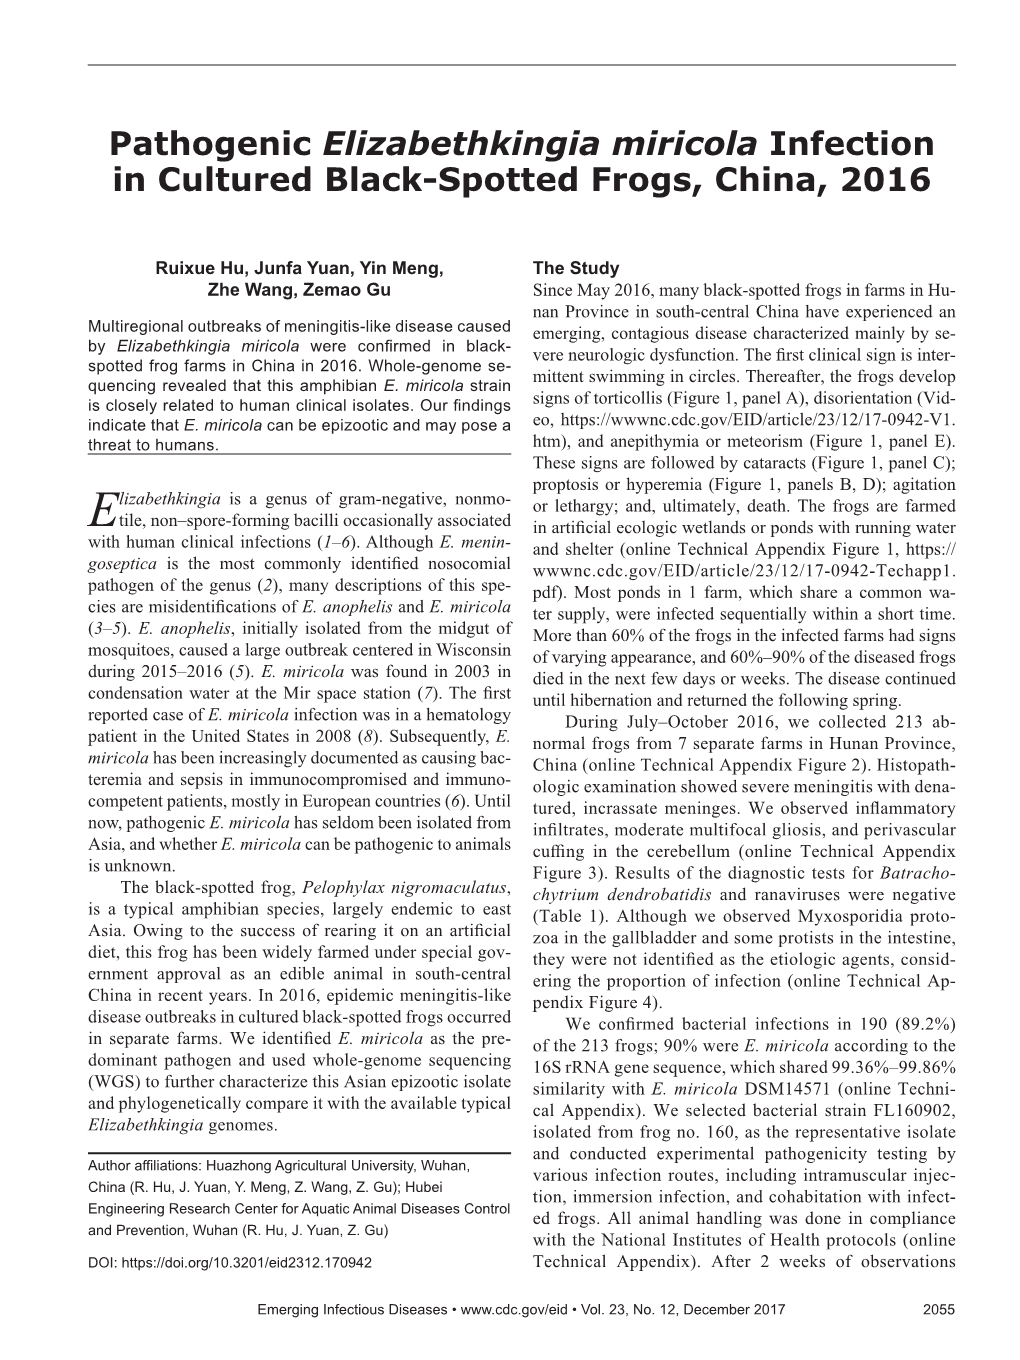 Pathogenic Elizabethkingia Miricola Infection in Cultured Black-Spotted Frogs, China, 2016